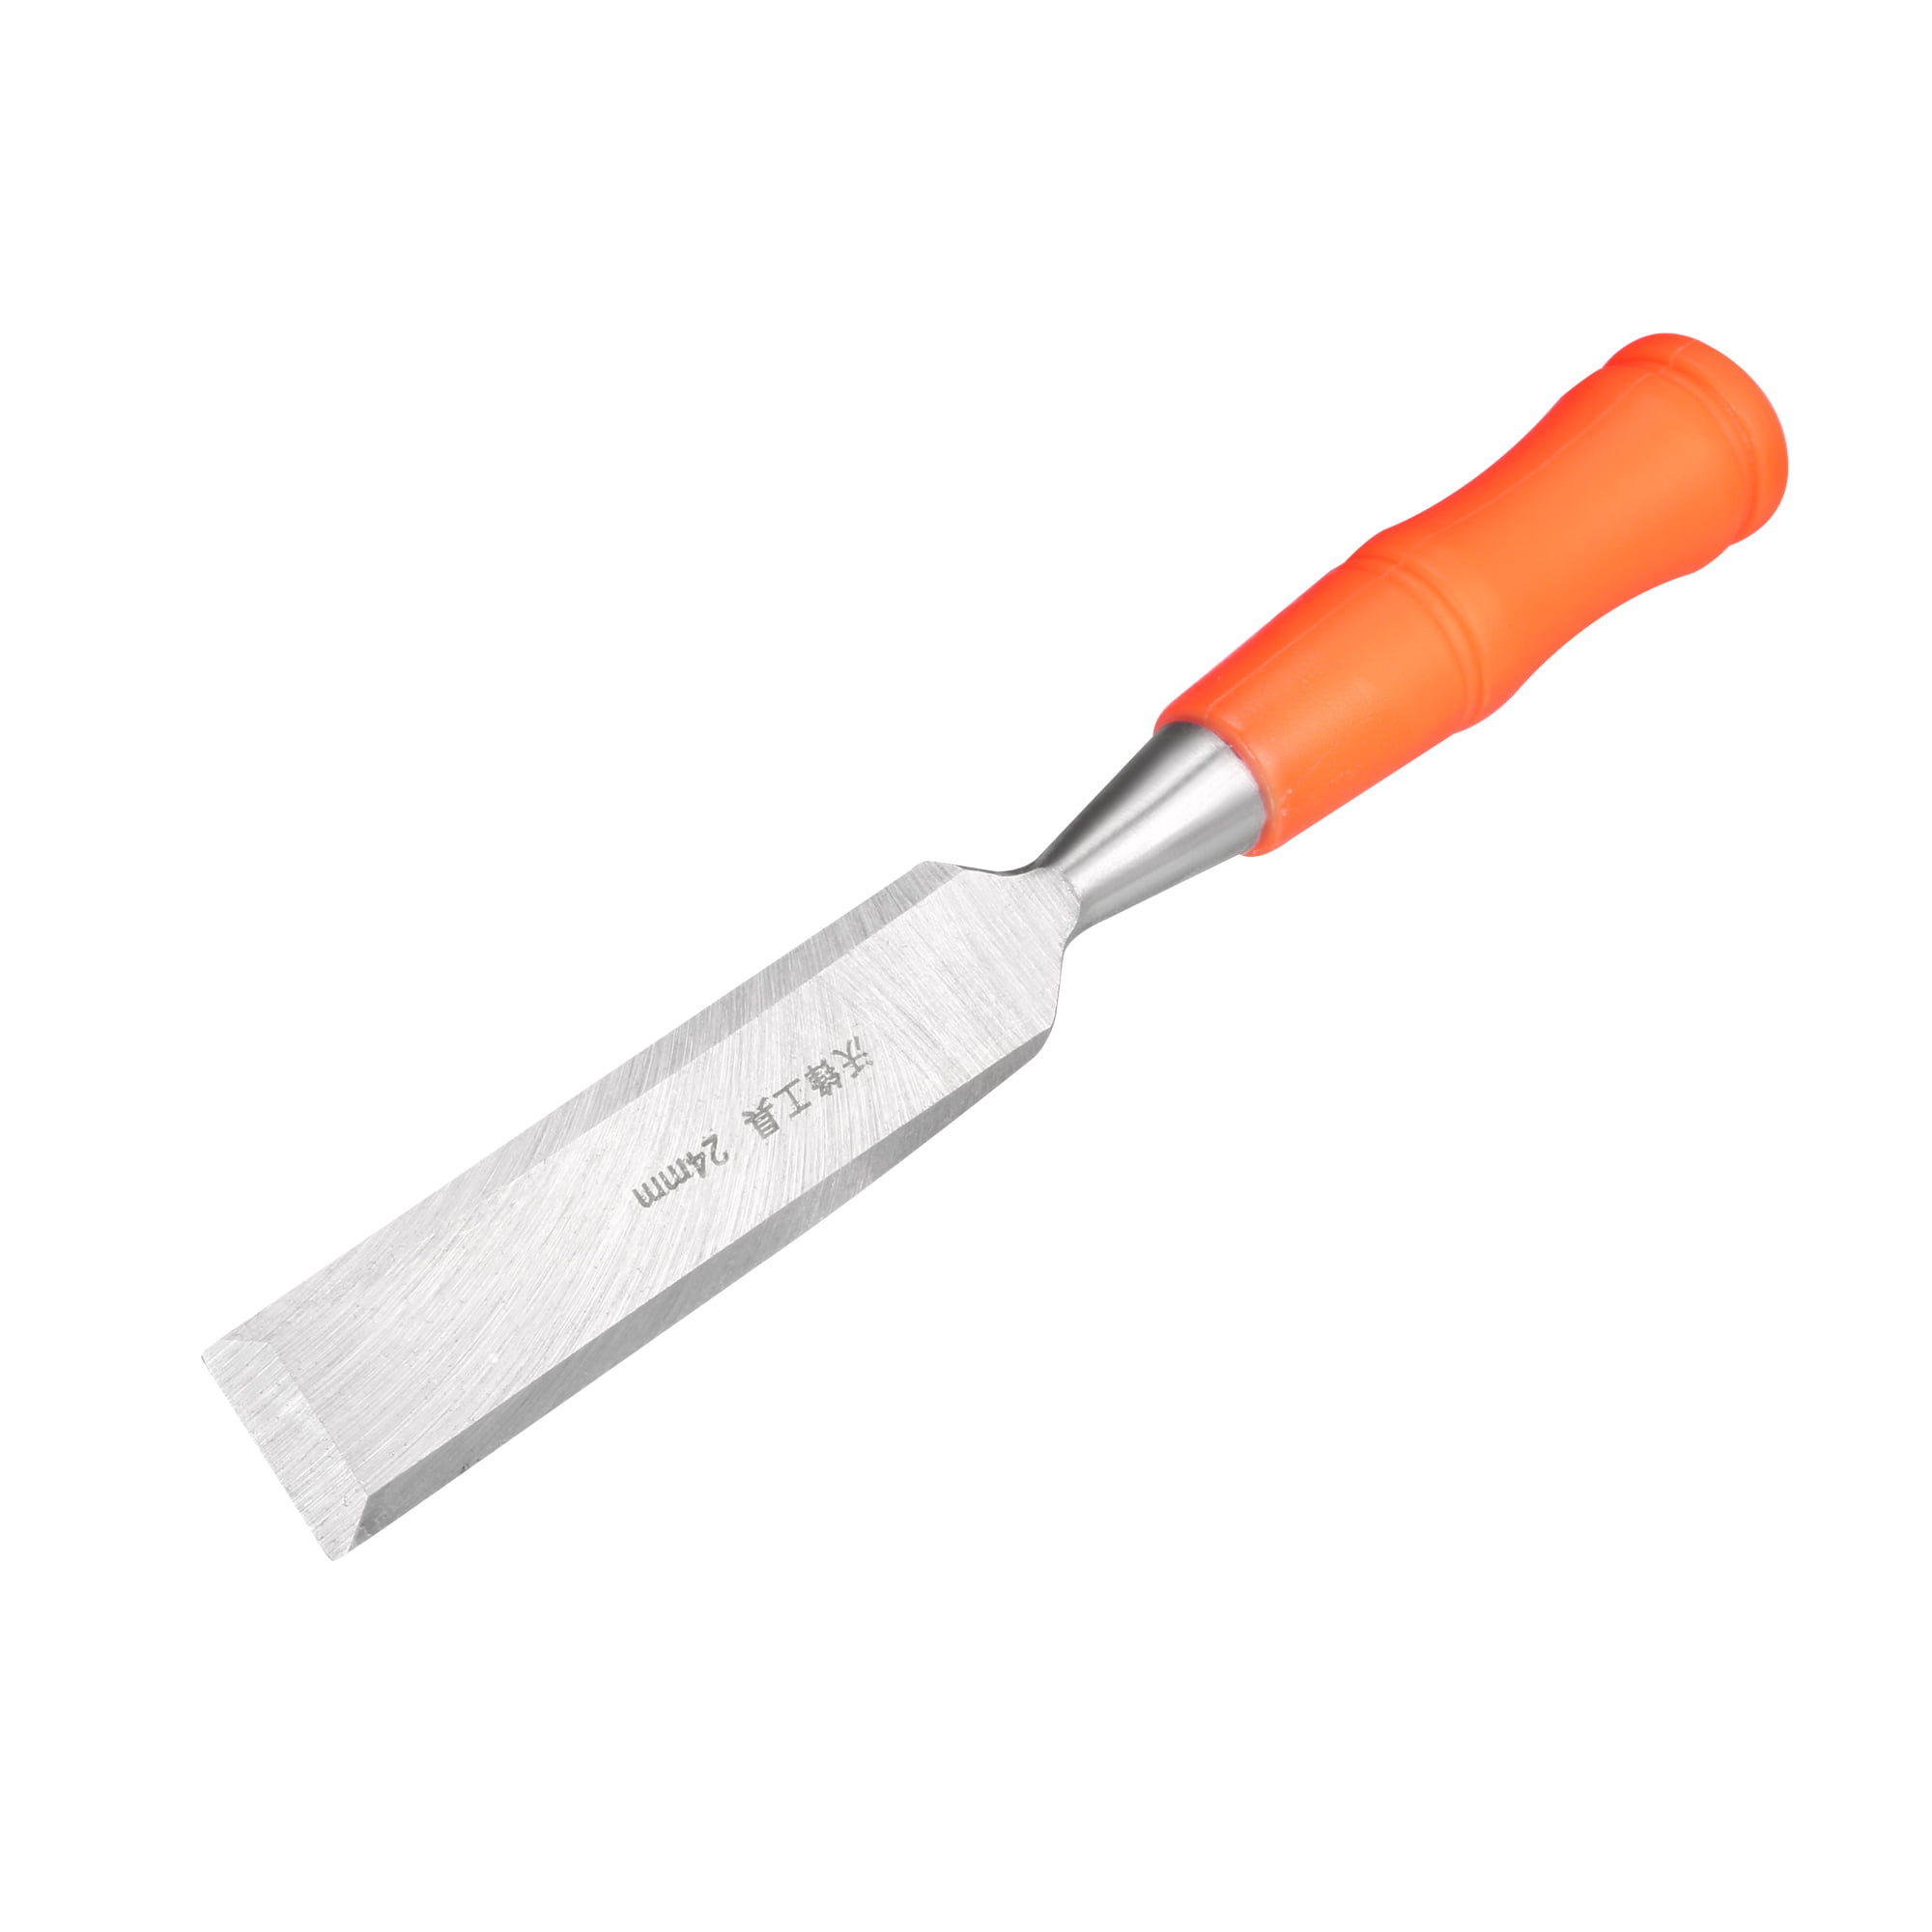 With Protective Covers 38mm Wood Chisel Hardened Steel 